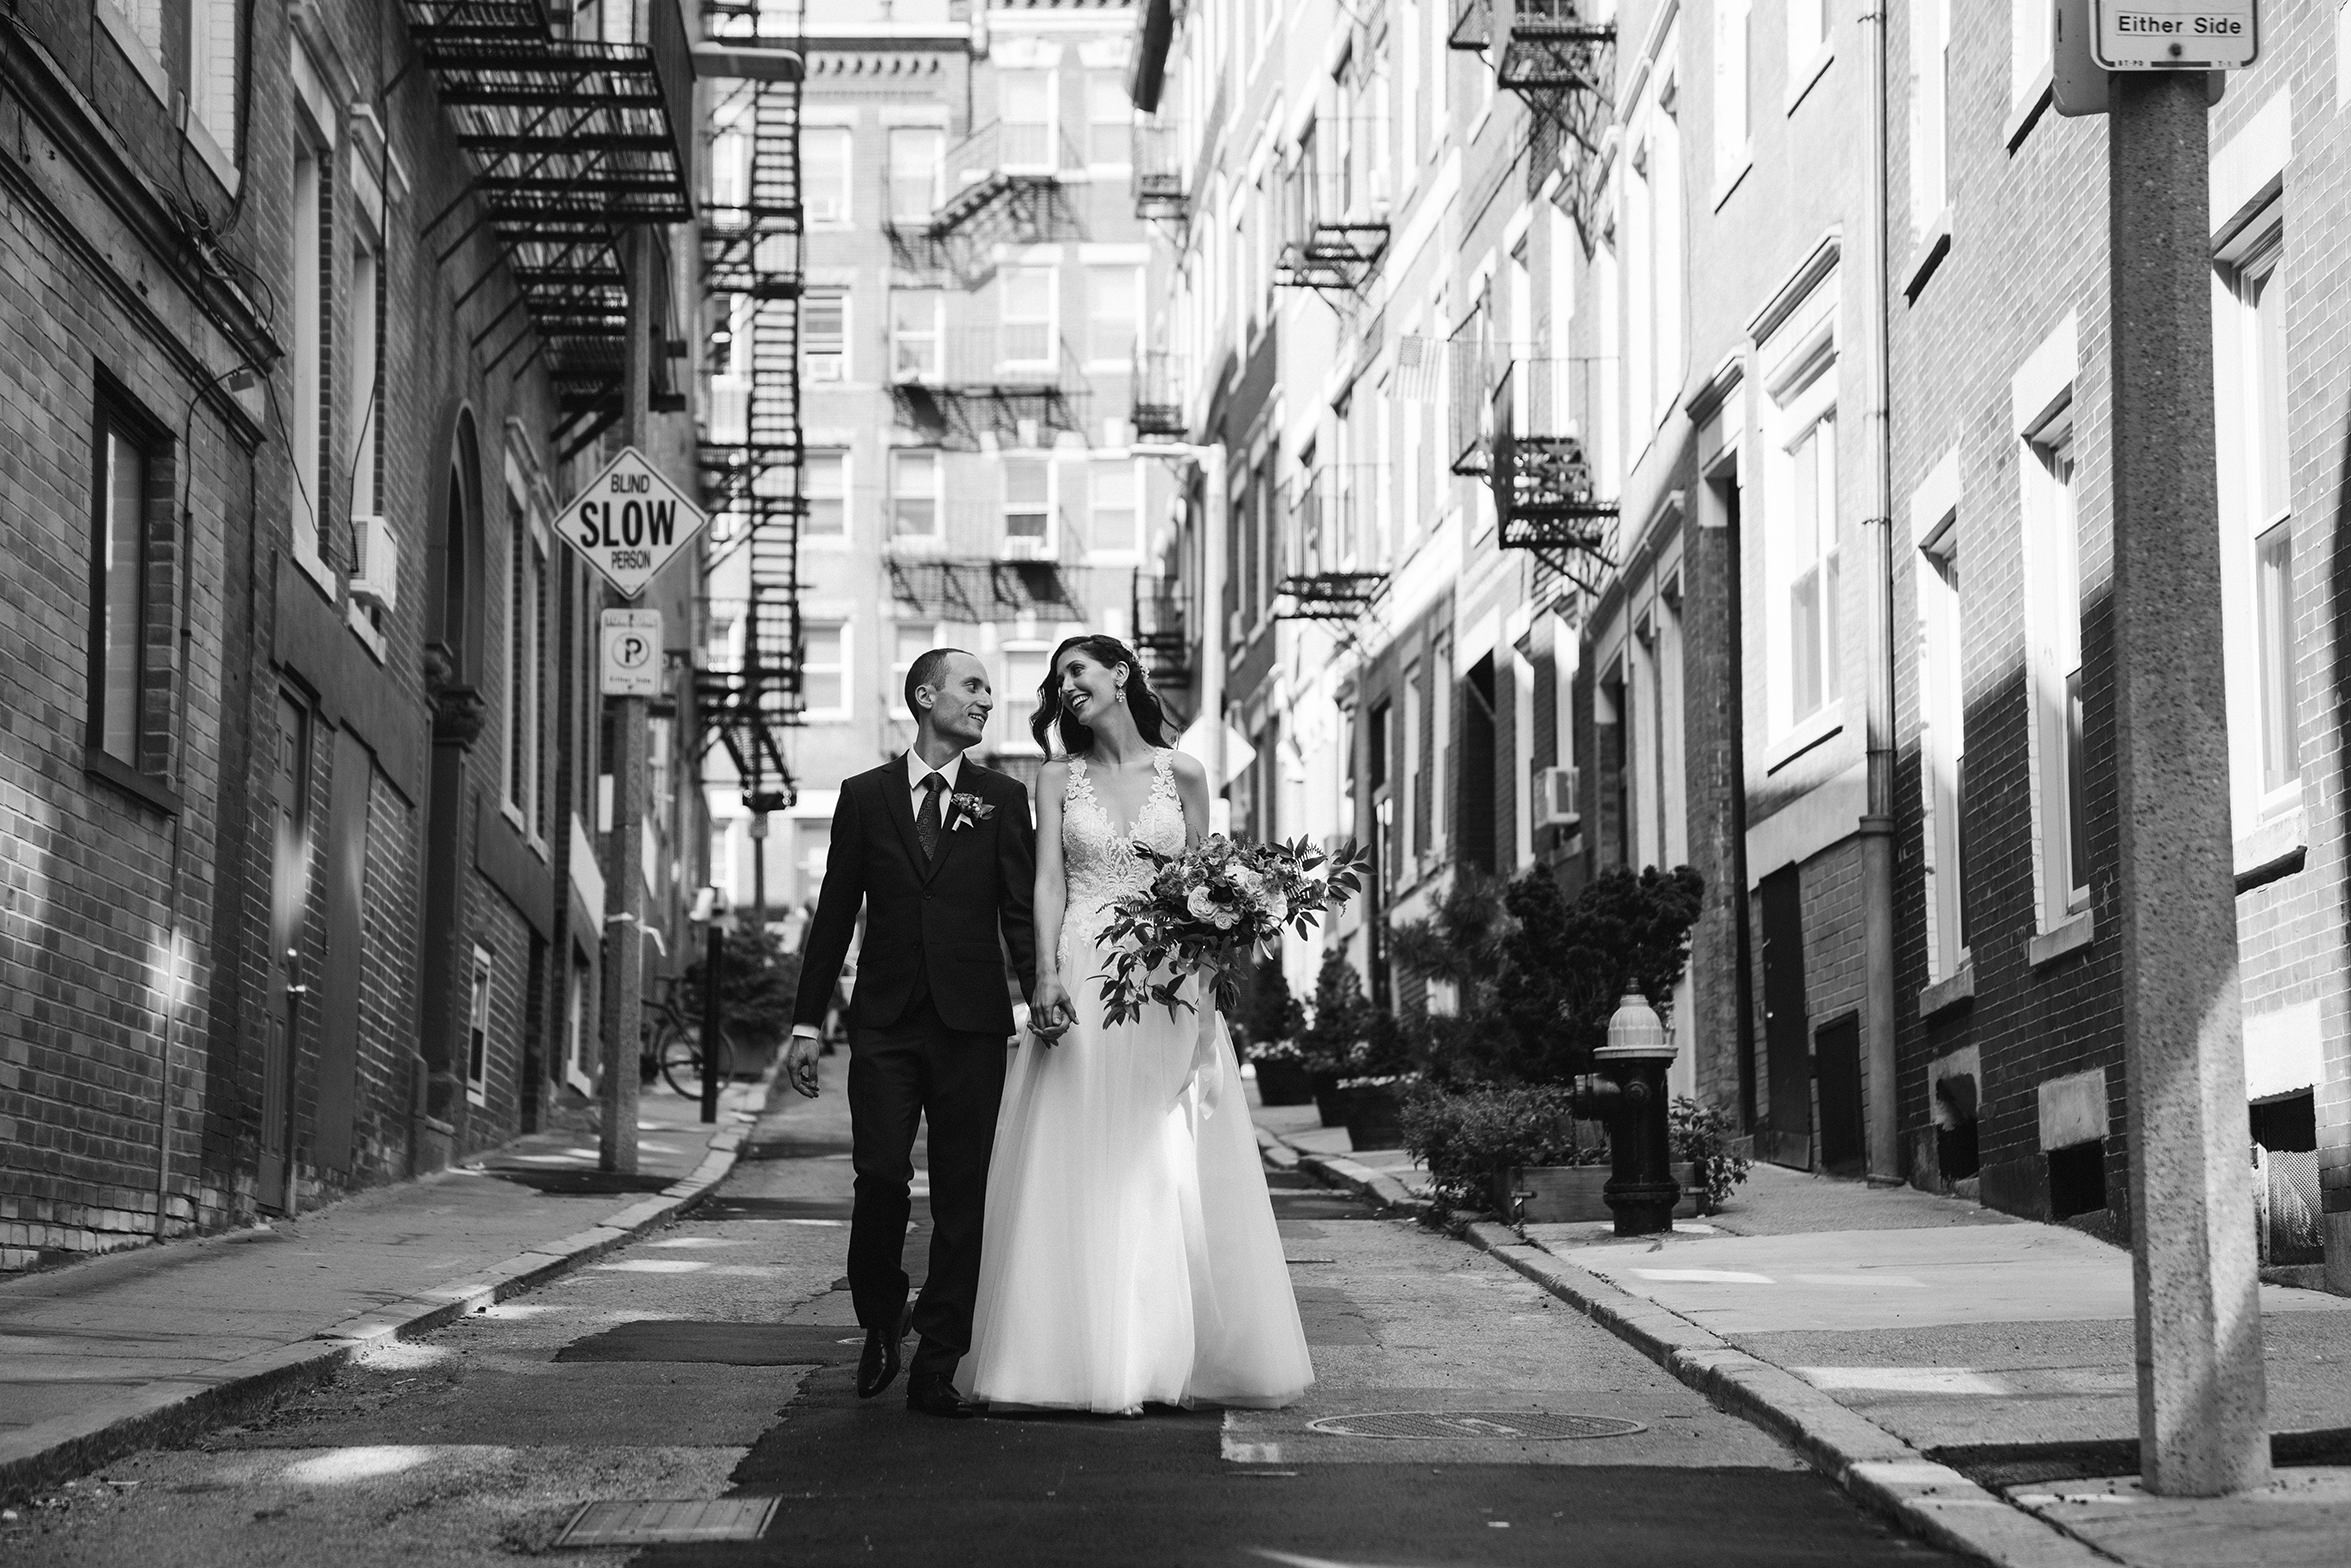 A documentary photograph featured in the best of wedding photography of 2019 showing a couple walking down the street after their wedding ceremony in the North End